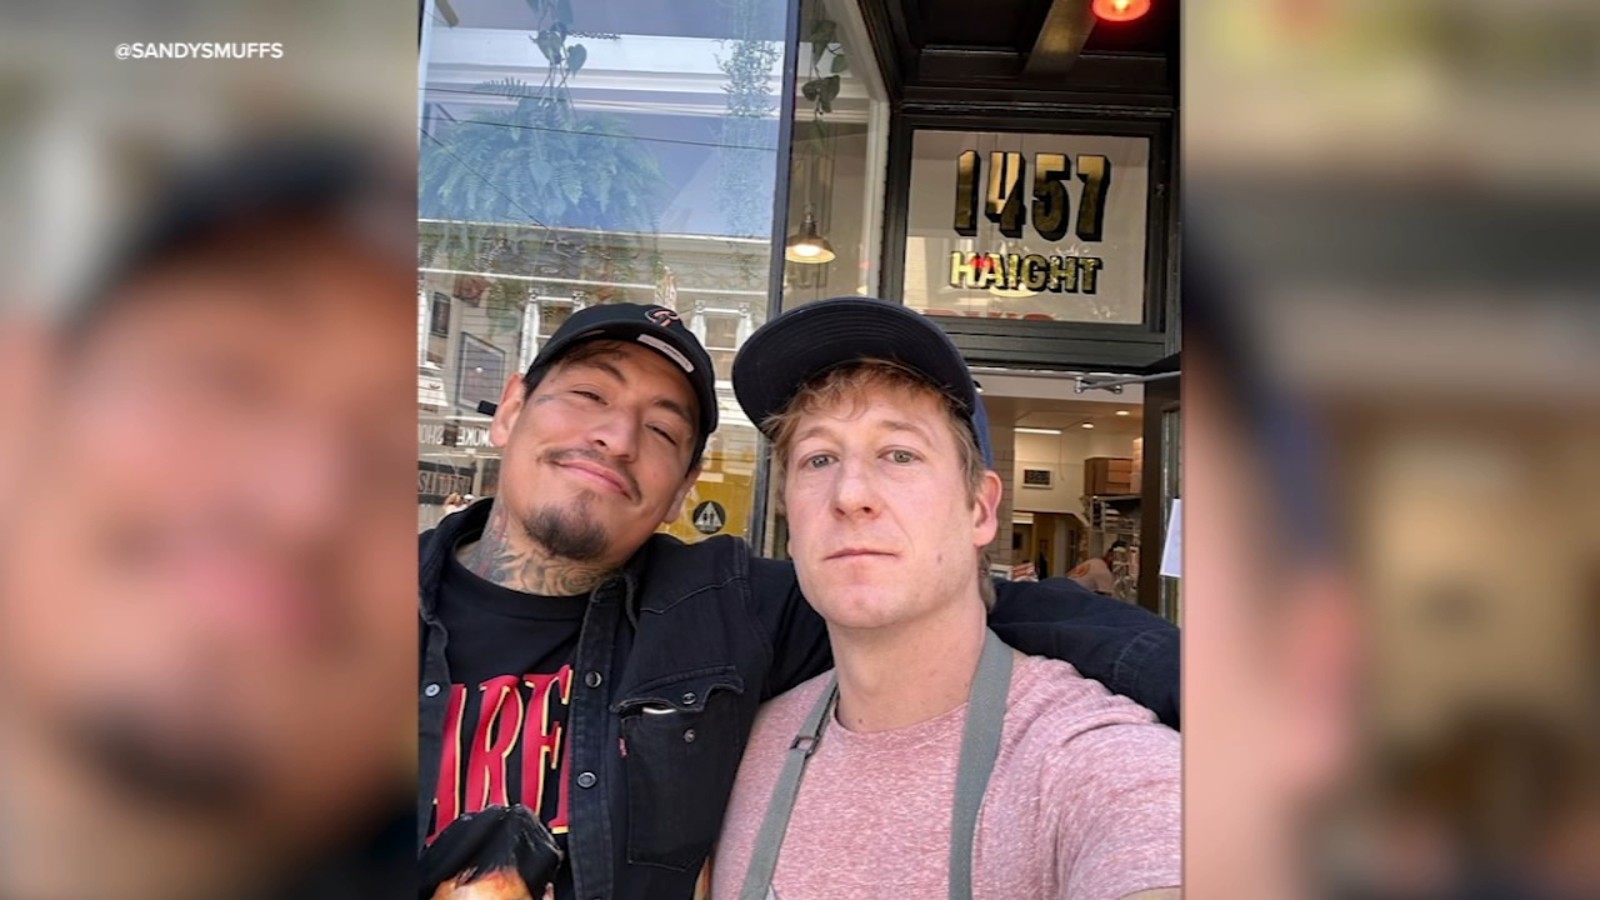 Man who punched SF restaurant owner in the face goes back to apologize after serving time